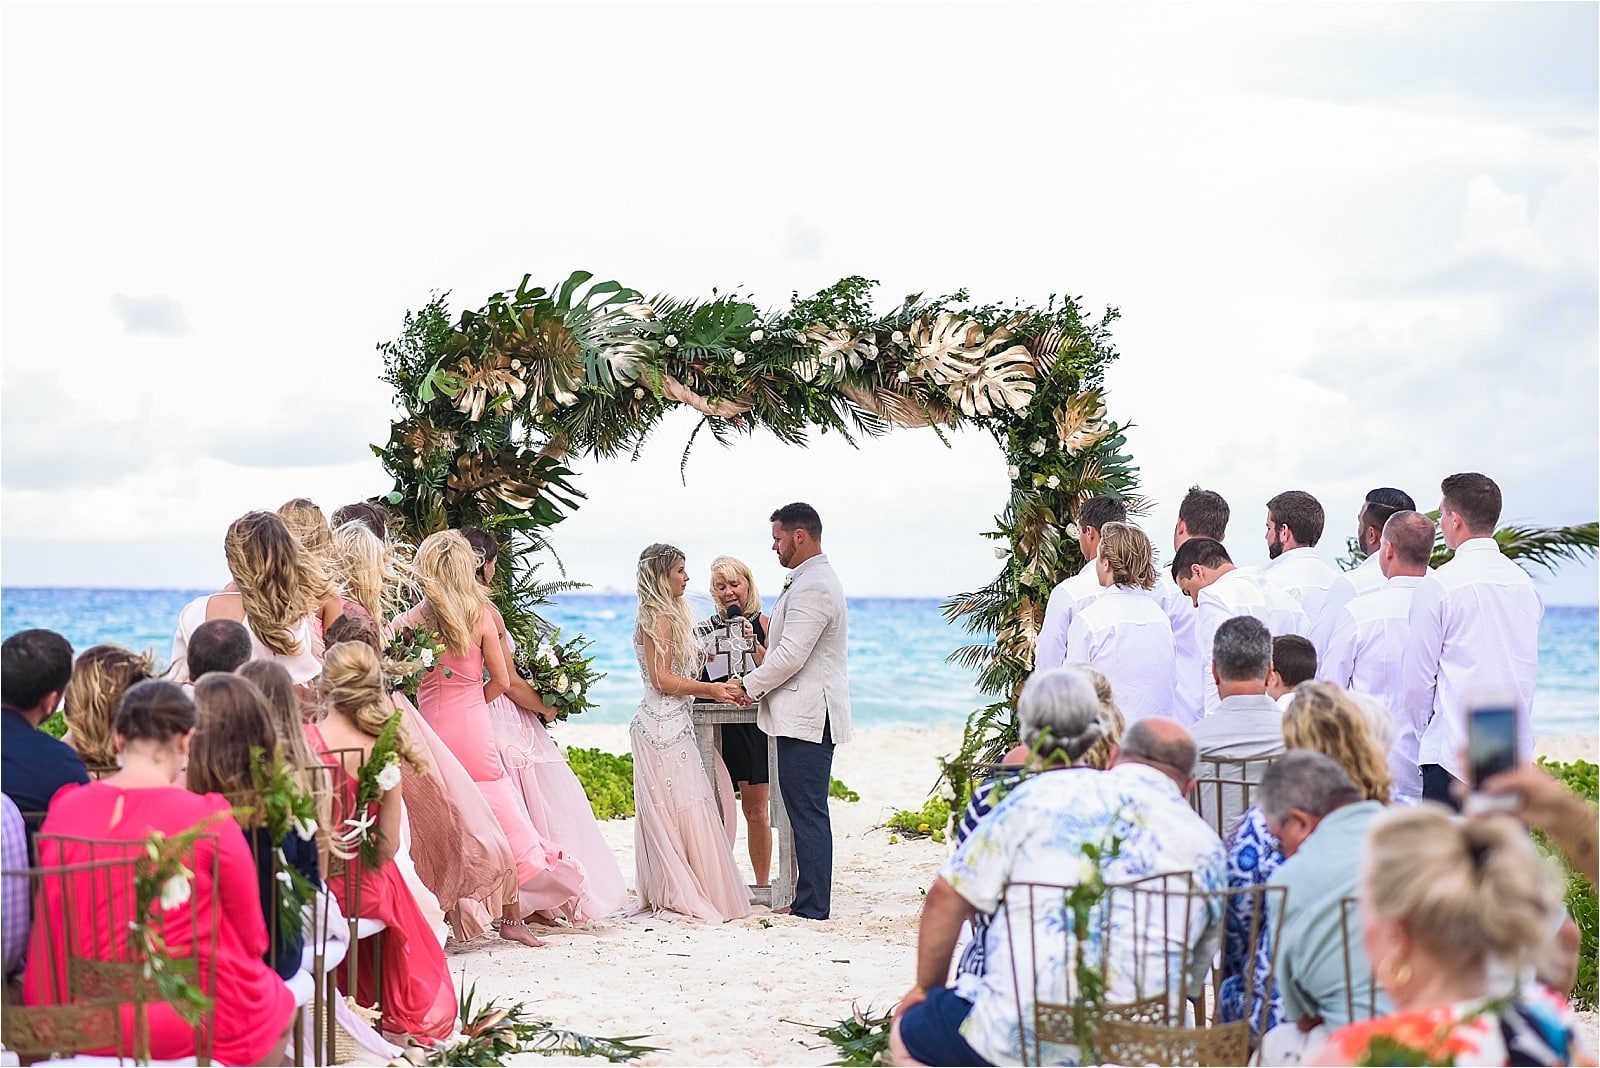 The Reef Playacar an All Inclusive Resort in Mexico for Your Destination Wedding or Honeymoon | Hill City Bride Virginia Wedding Blog